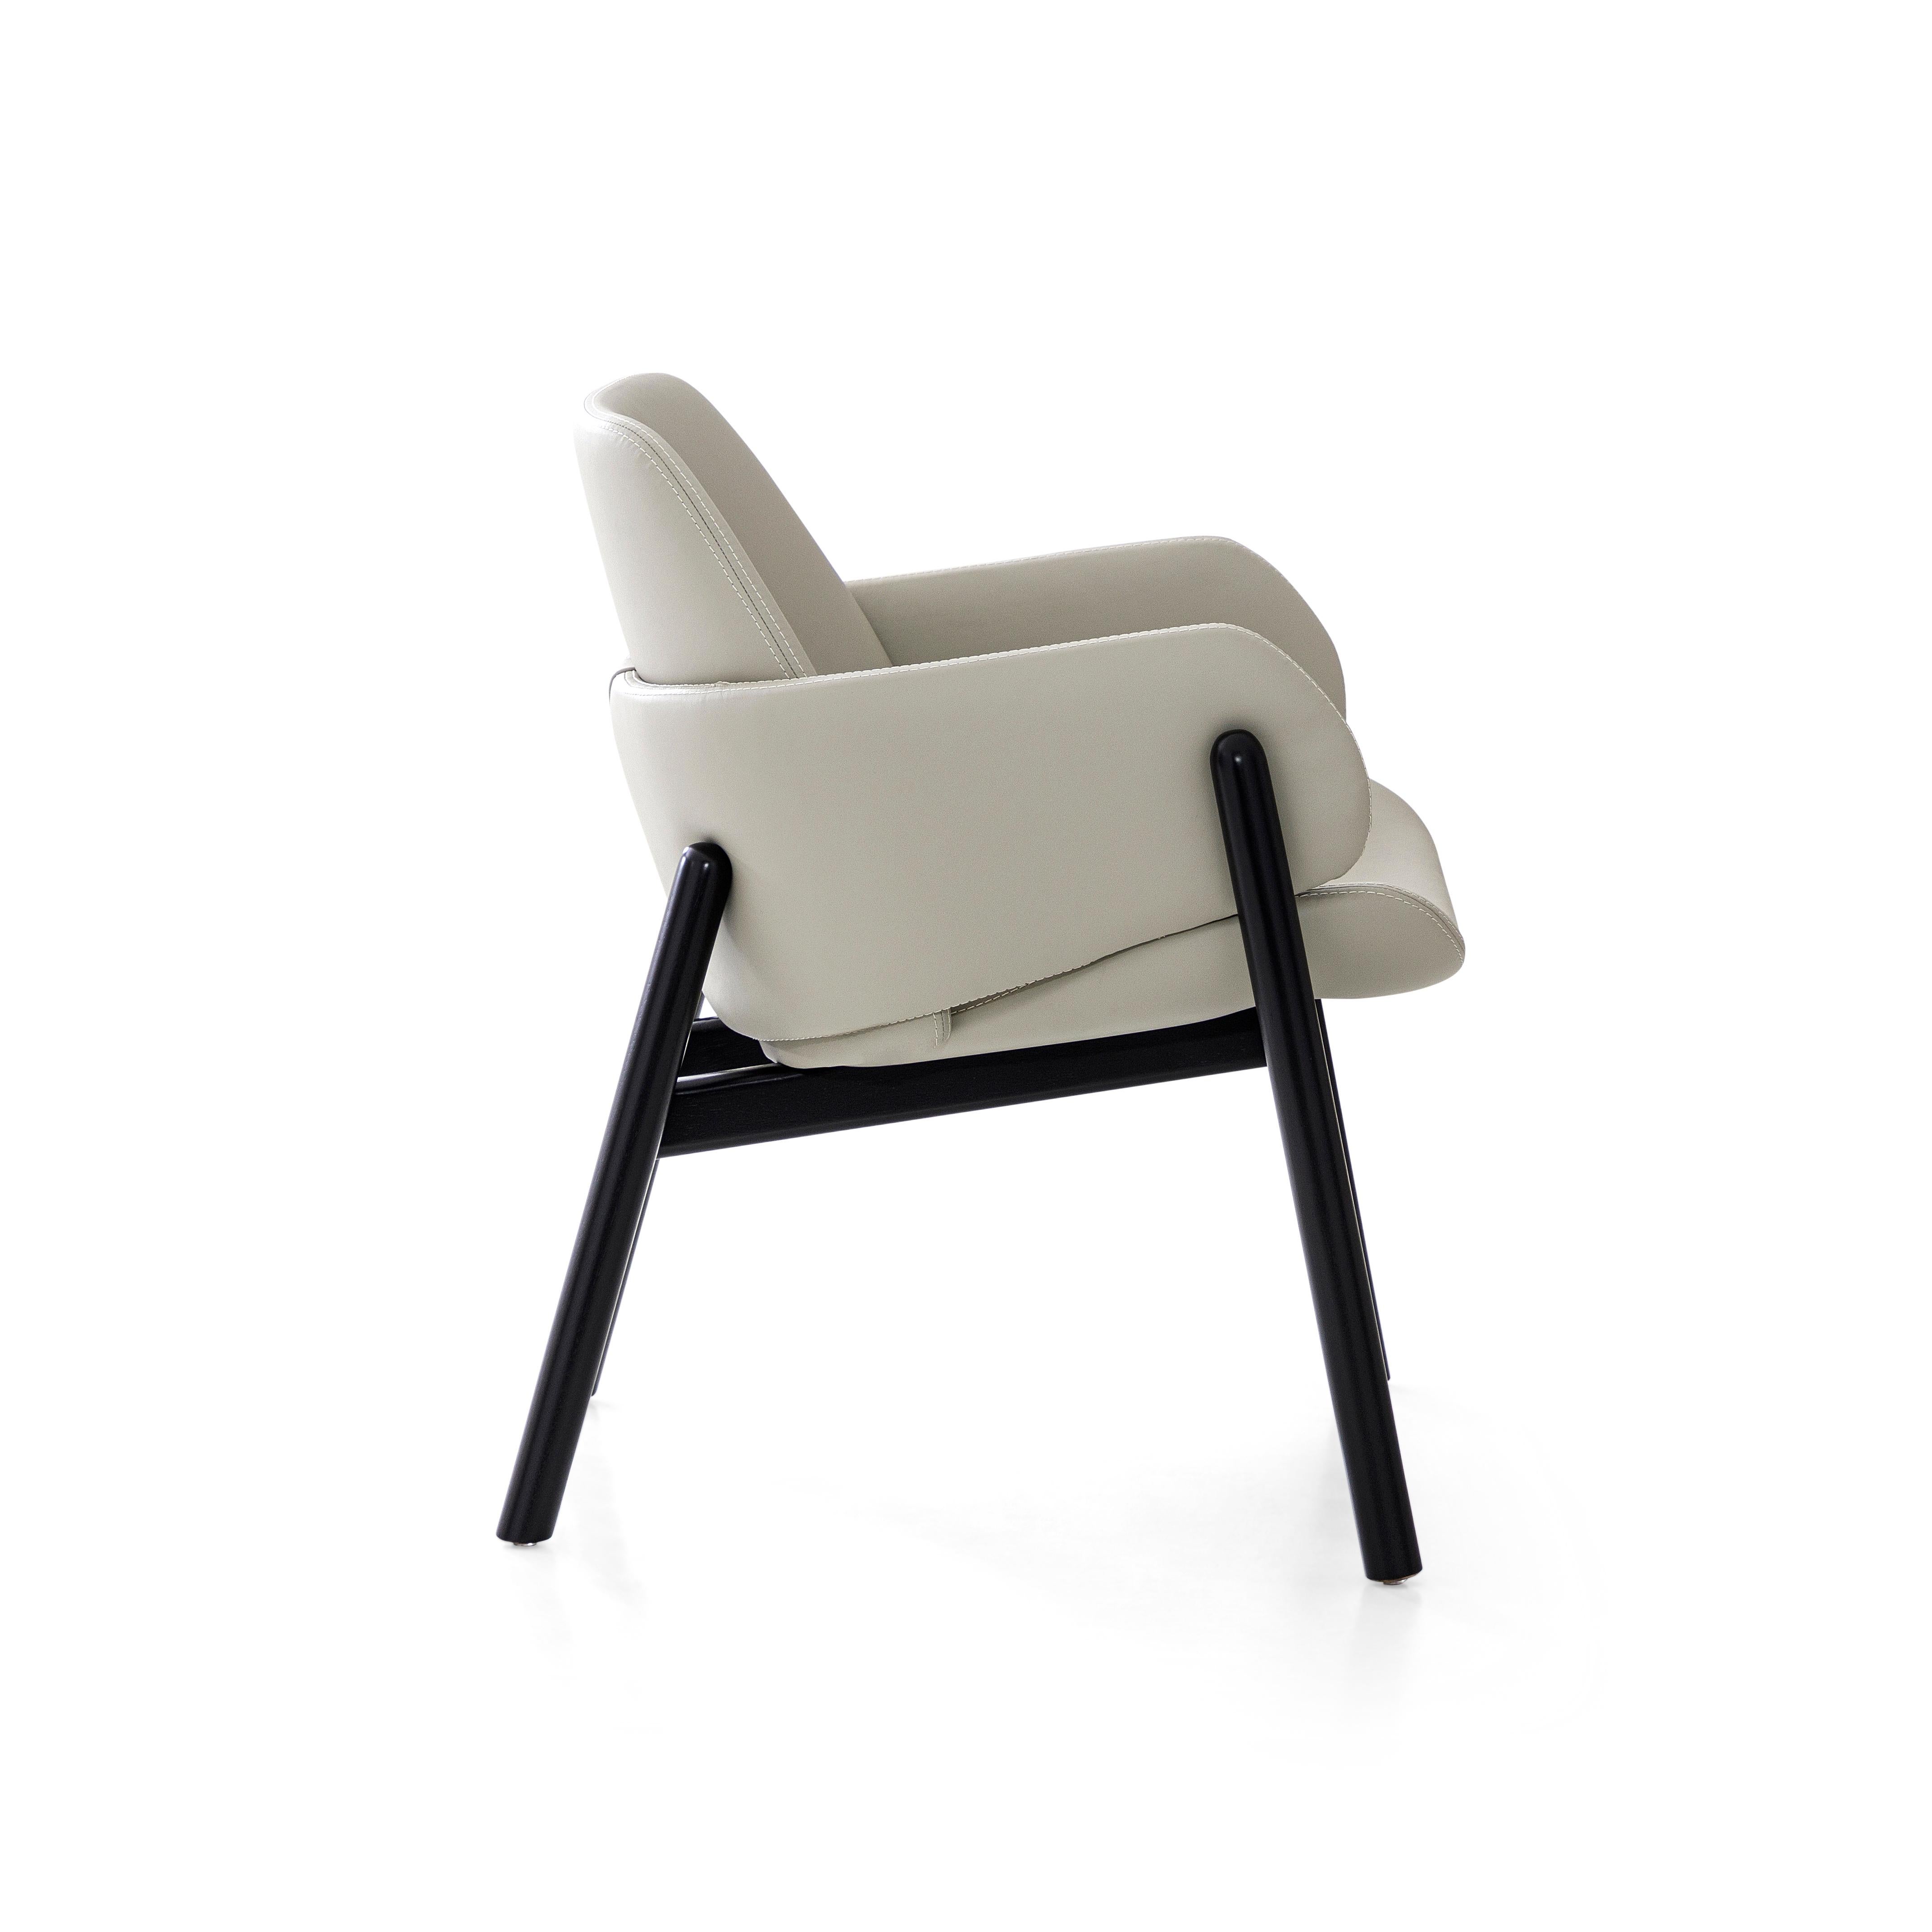 The above chair goes above and beyond in terms of design and comfortability. The combination of the off-white leather and the black painted frame allows you to mix the Above chair in rooms already established and rooms with a new design. The seat,